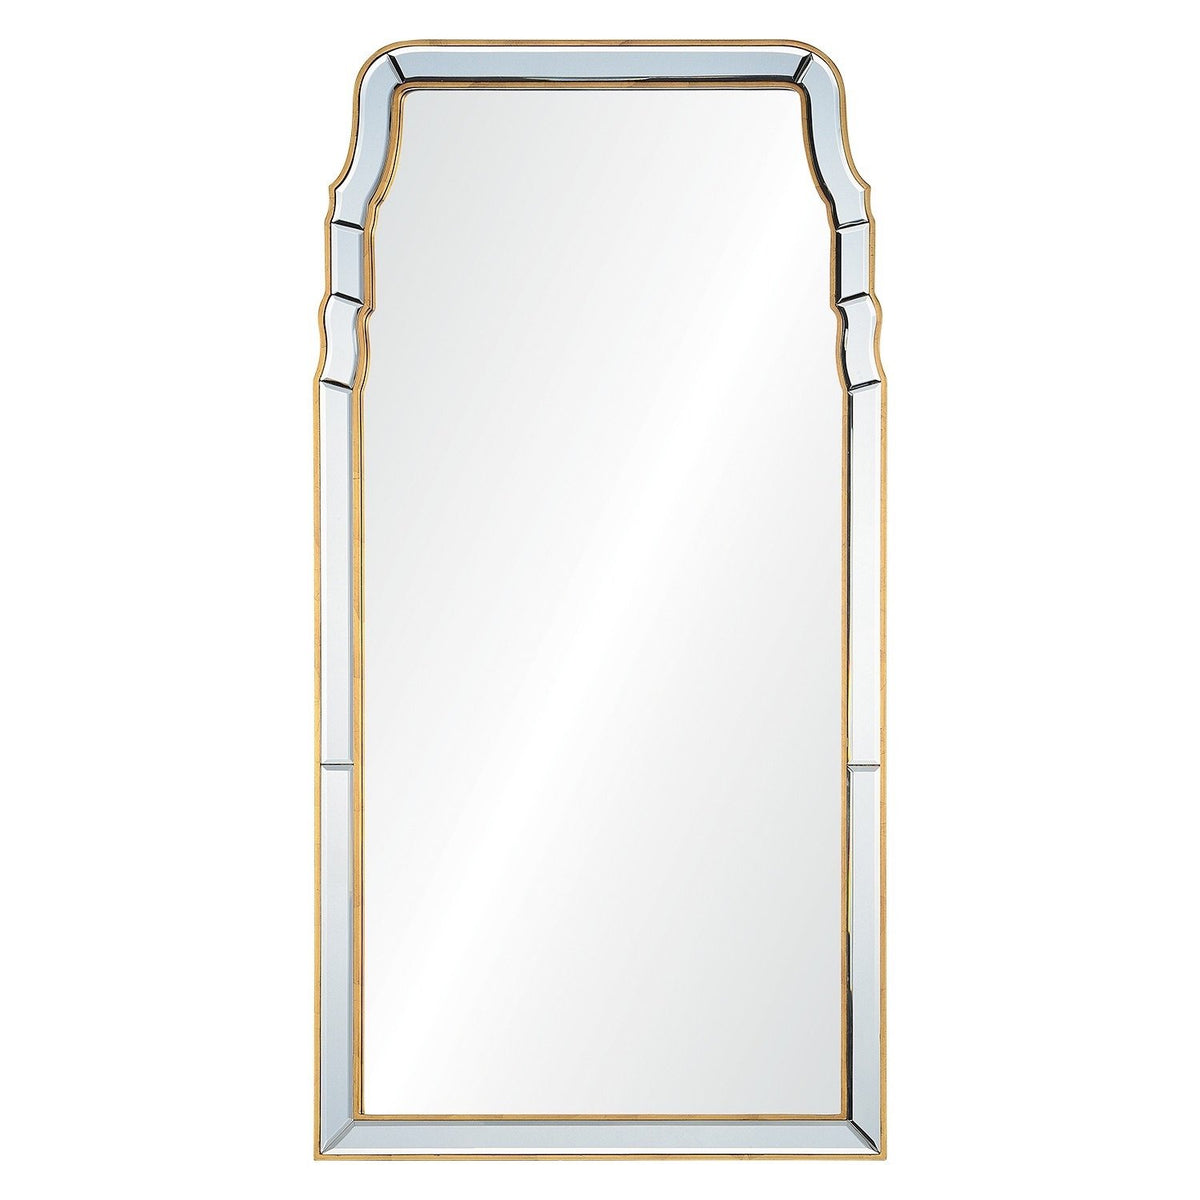 Mirror Image Home - Distressed Gold Queen Anne Mirror | Fig Linens